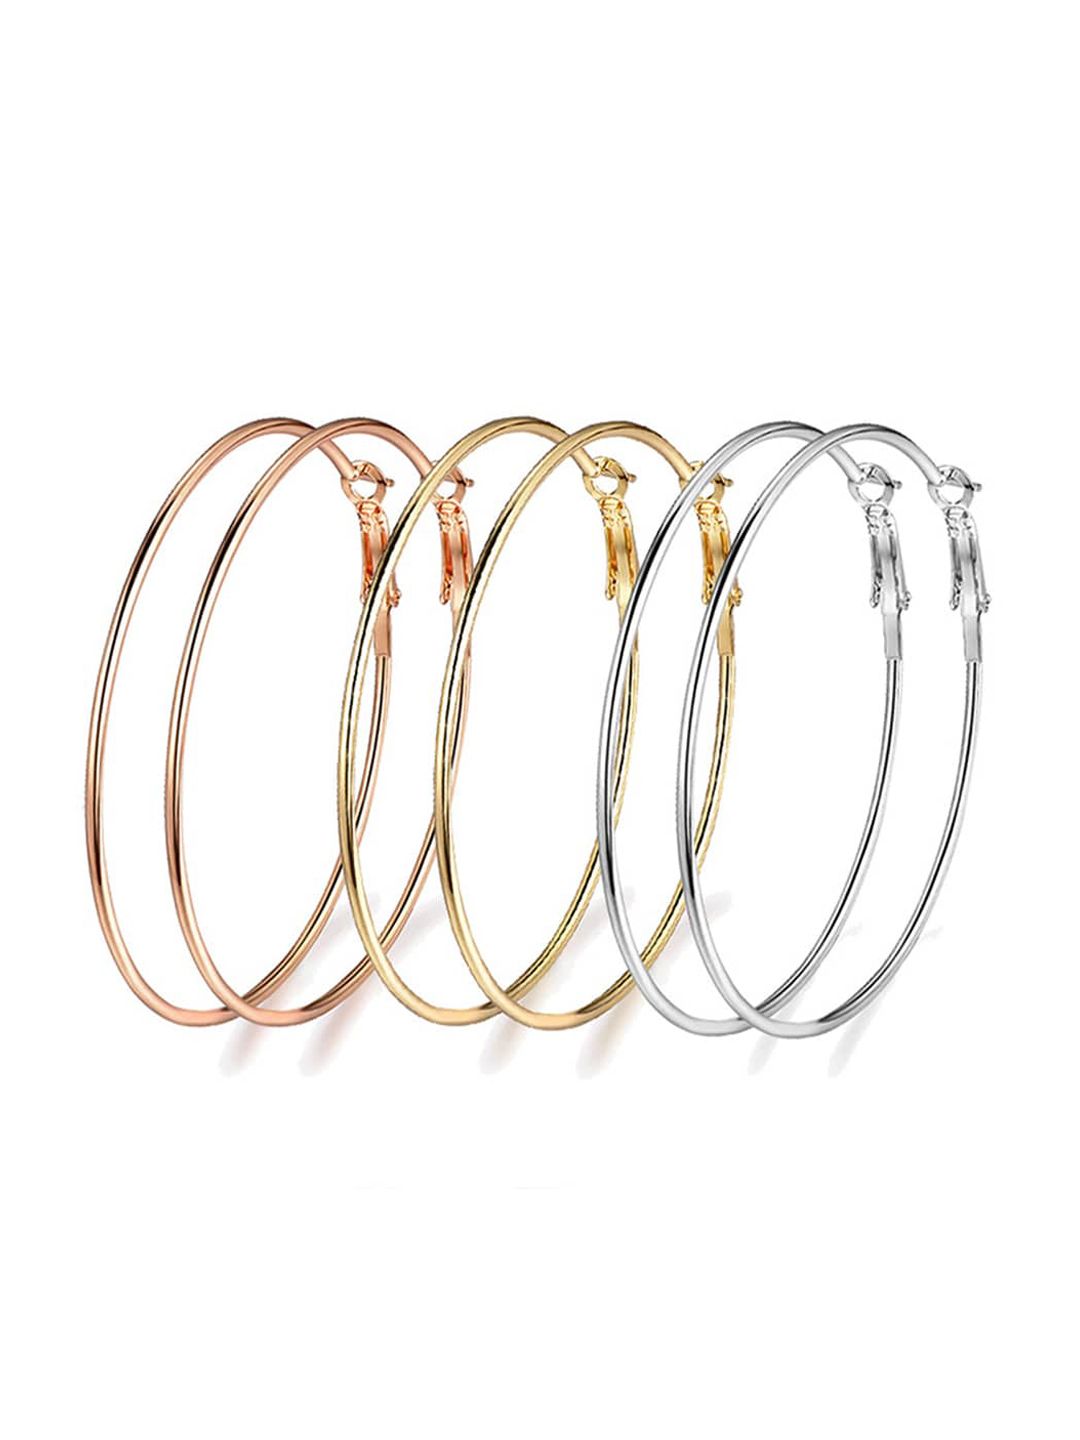 Yellow Chimes Set Of 3 Gold-Plated Silver-Toned Circular Hoop Earrings Price in India